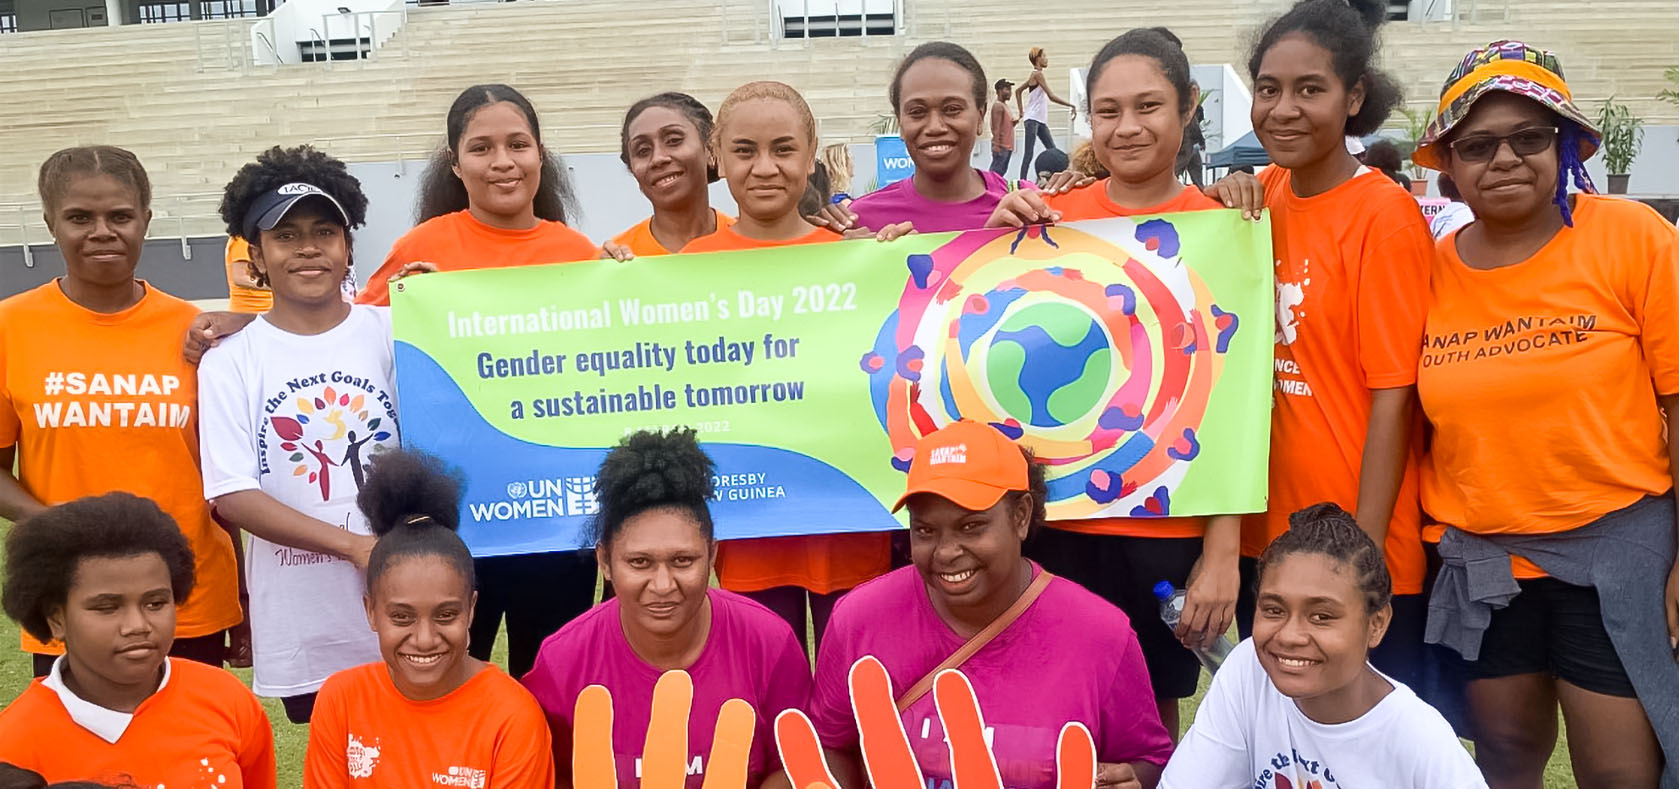 Youths who turned up for the march to kick start the International Women’s Day 2022 celebrations in Port Moresby. Photo: UN Women/Aidah Nanyonjo